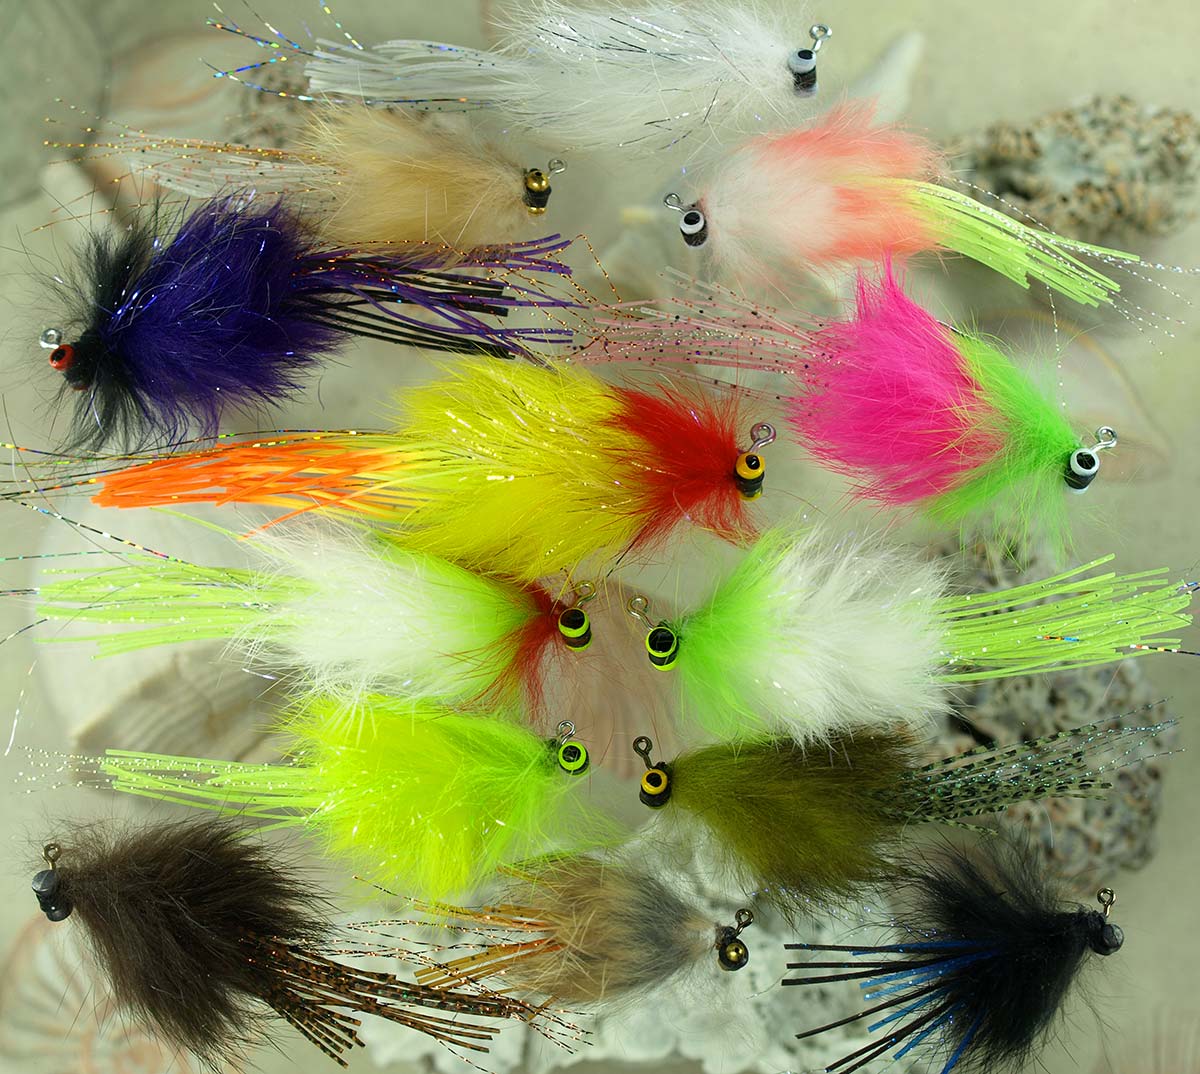 Unbranded Striped Bass Fly Fishing Baits, Lures & Flies for sale